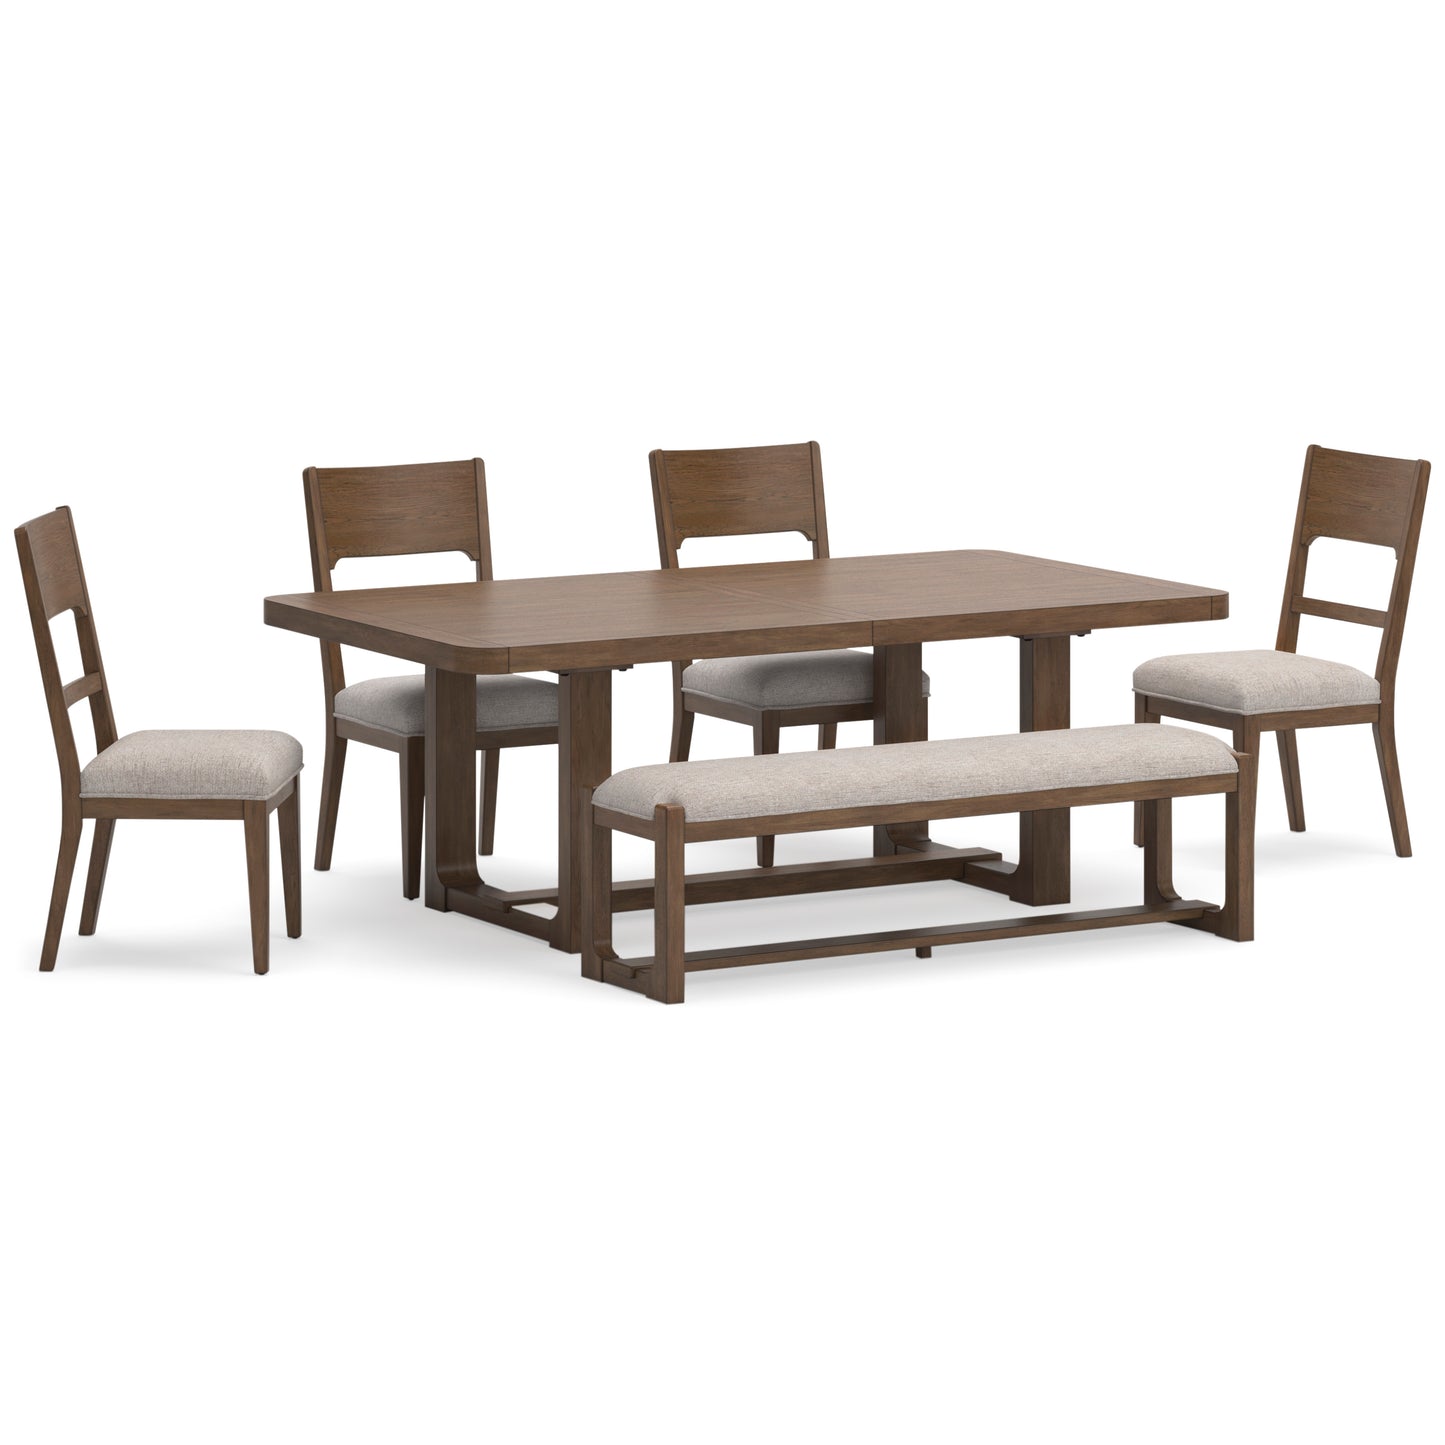 CABALYNN DINING SET - 4 CHAIRS, TABLE & BENCH